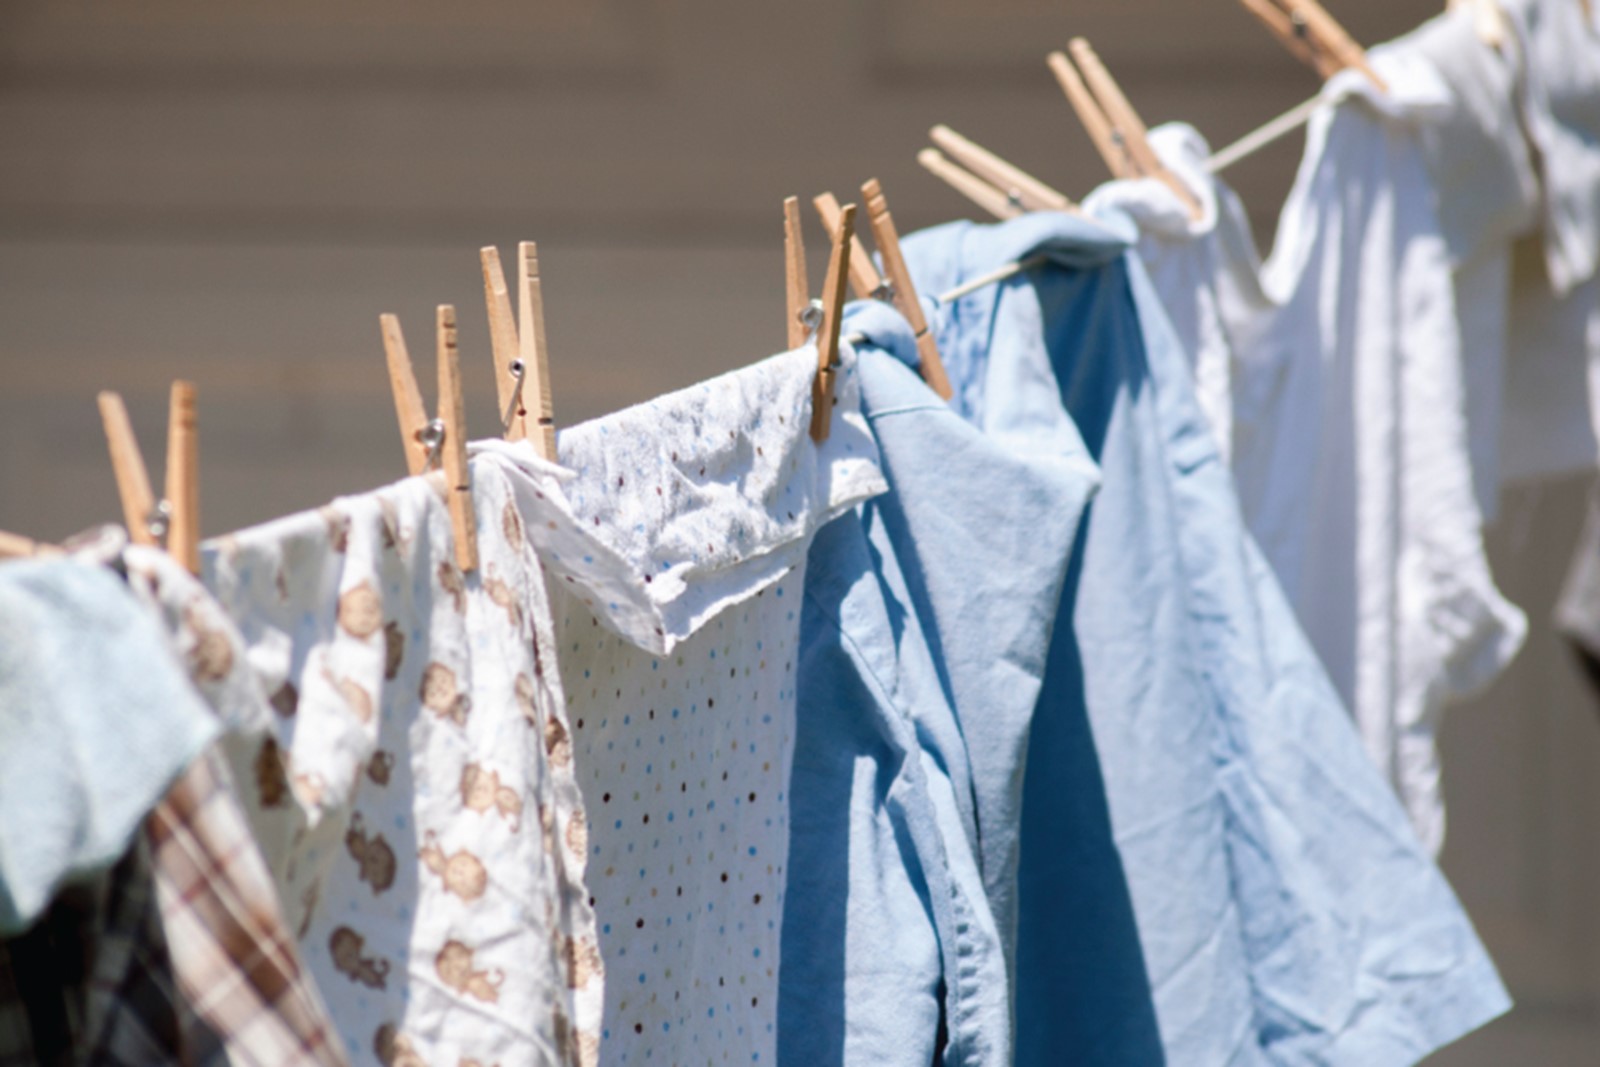 Clothes drying on a line outside